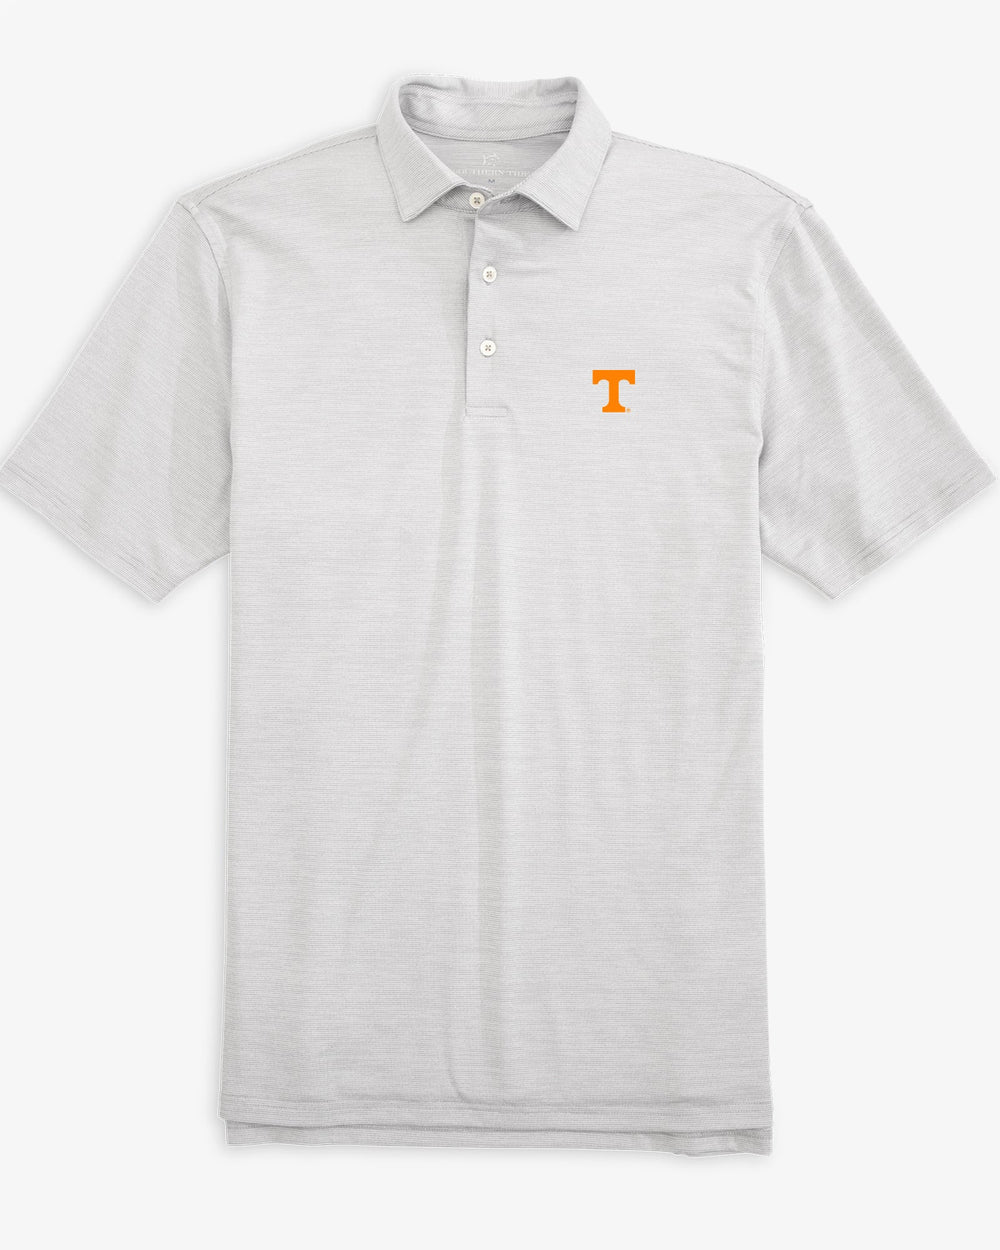 The front view of the Tennessee Vols Driver Spacedye Polo Shirt by Southern Tide - Slate Grey